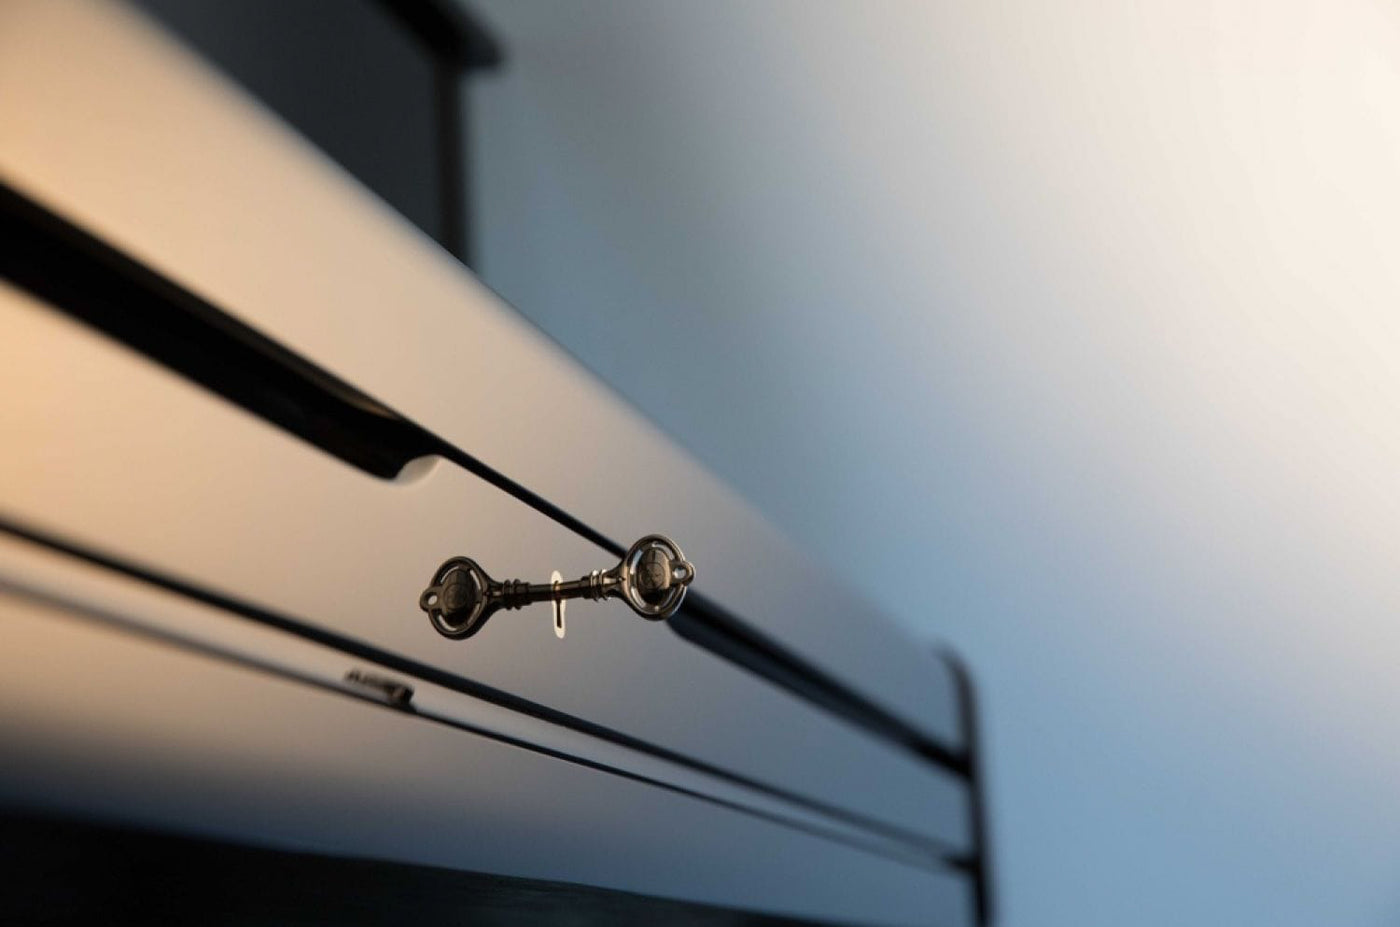 Close-up view of a piano lid prop stick with a blurred background, showcasing part of the piano's sleek black finish.